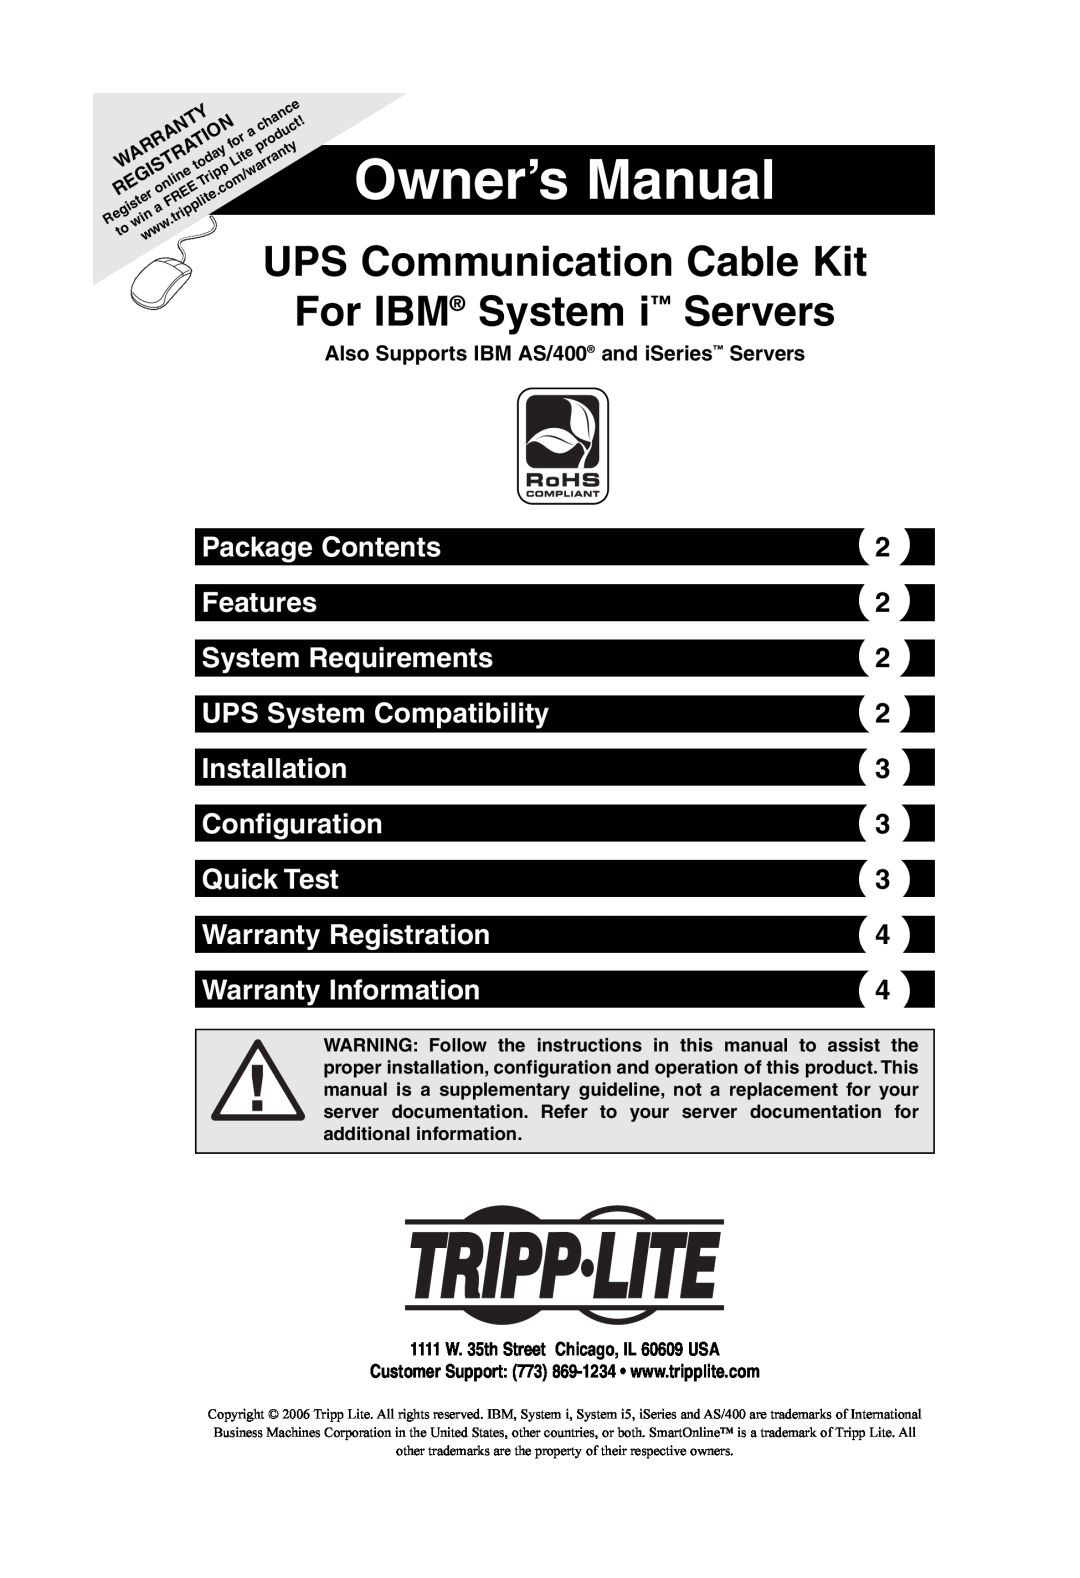 Tripp Lite UPS Communication Cable Kit owner manual Package Contents, Features, System Requirements, Installation 